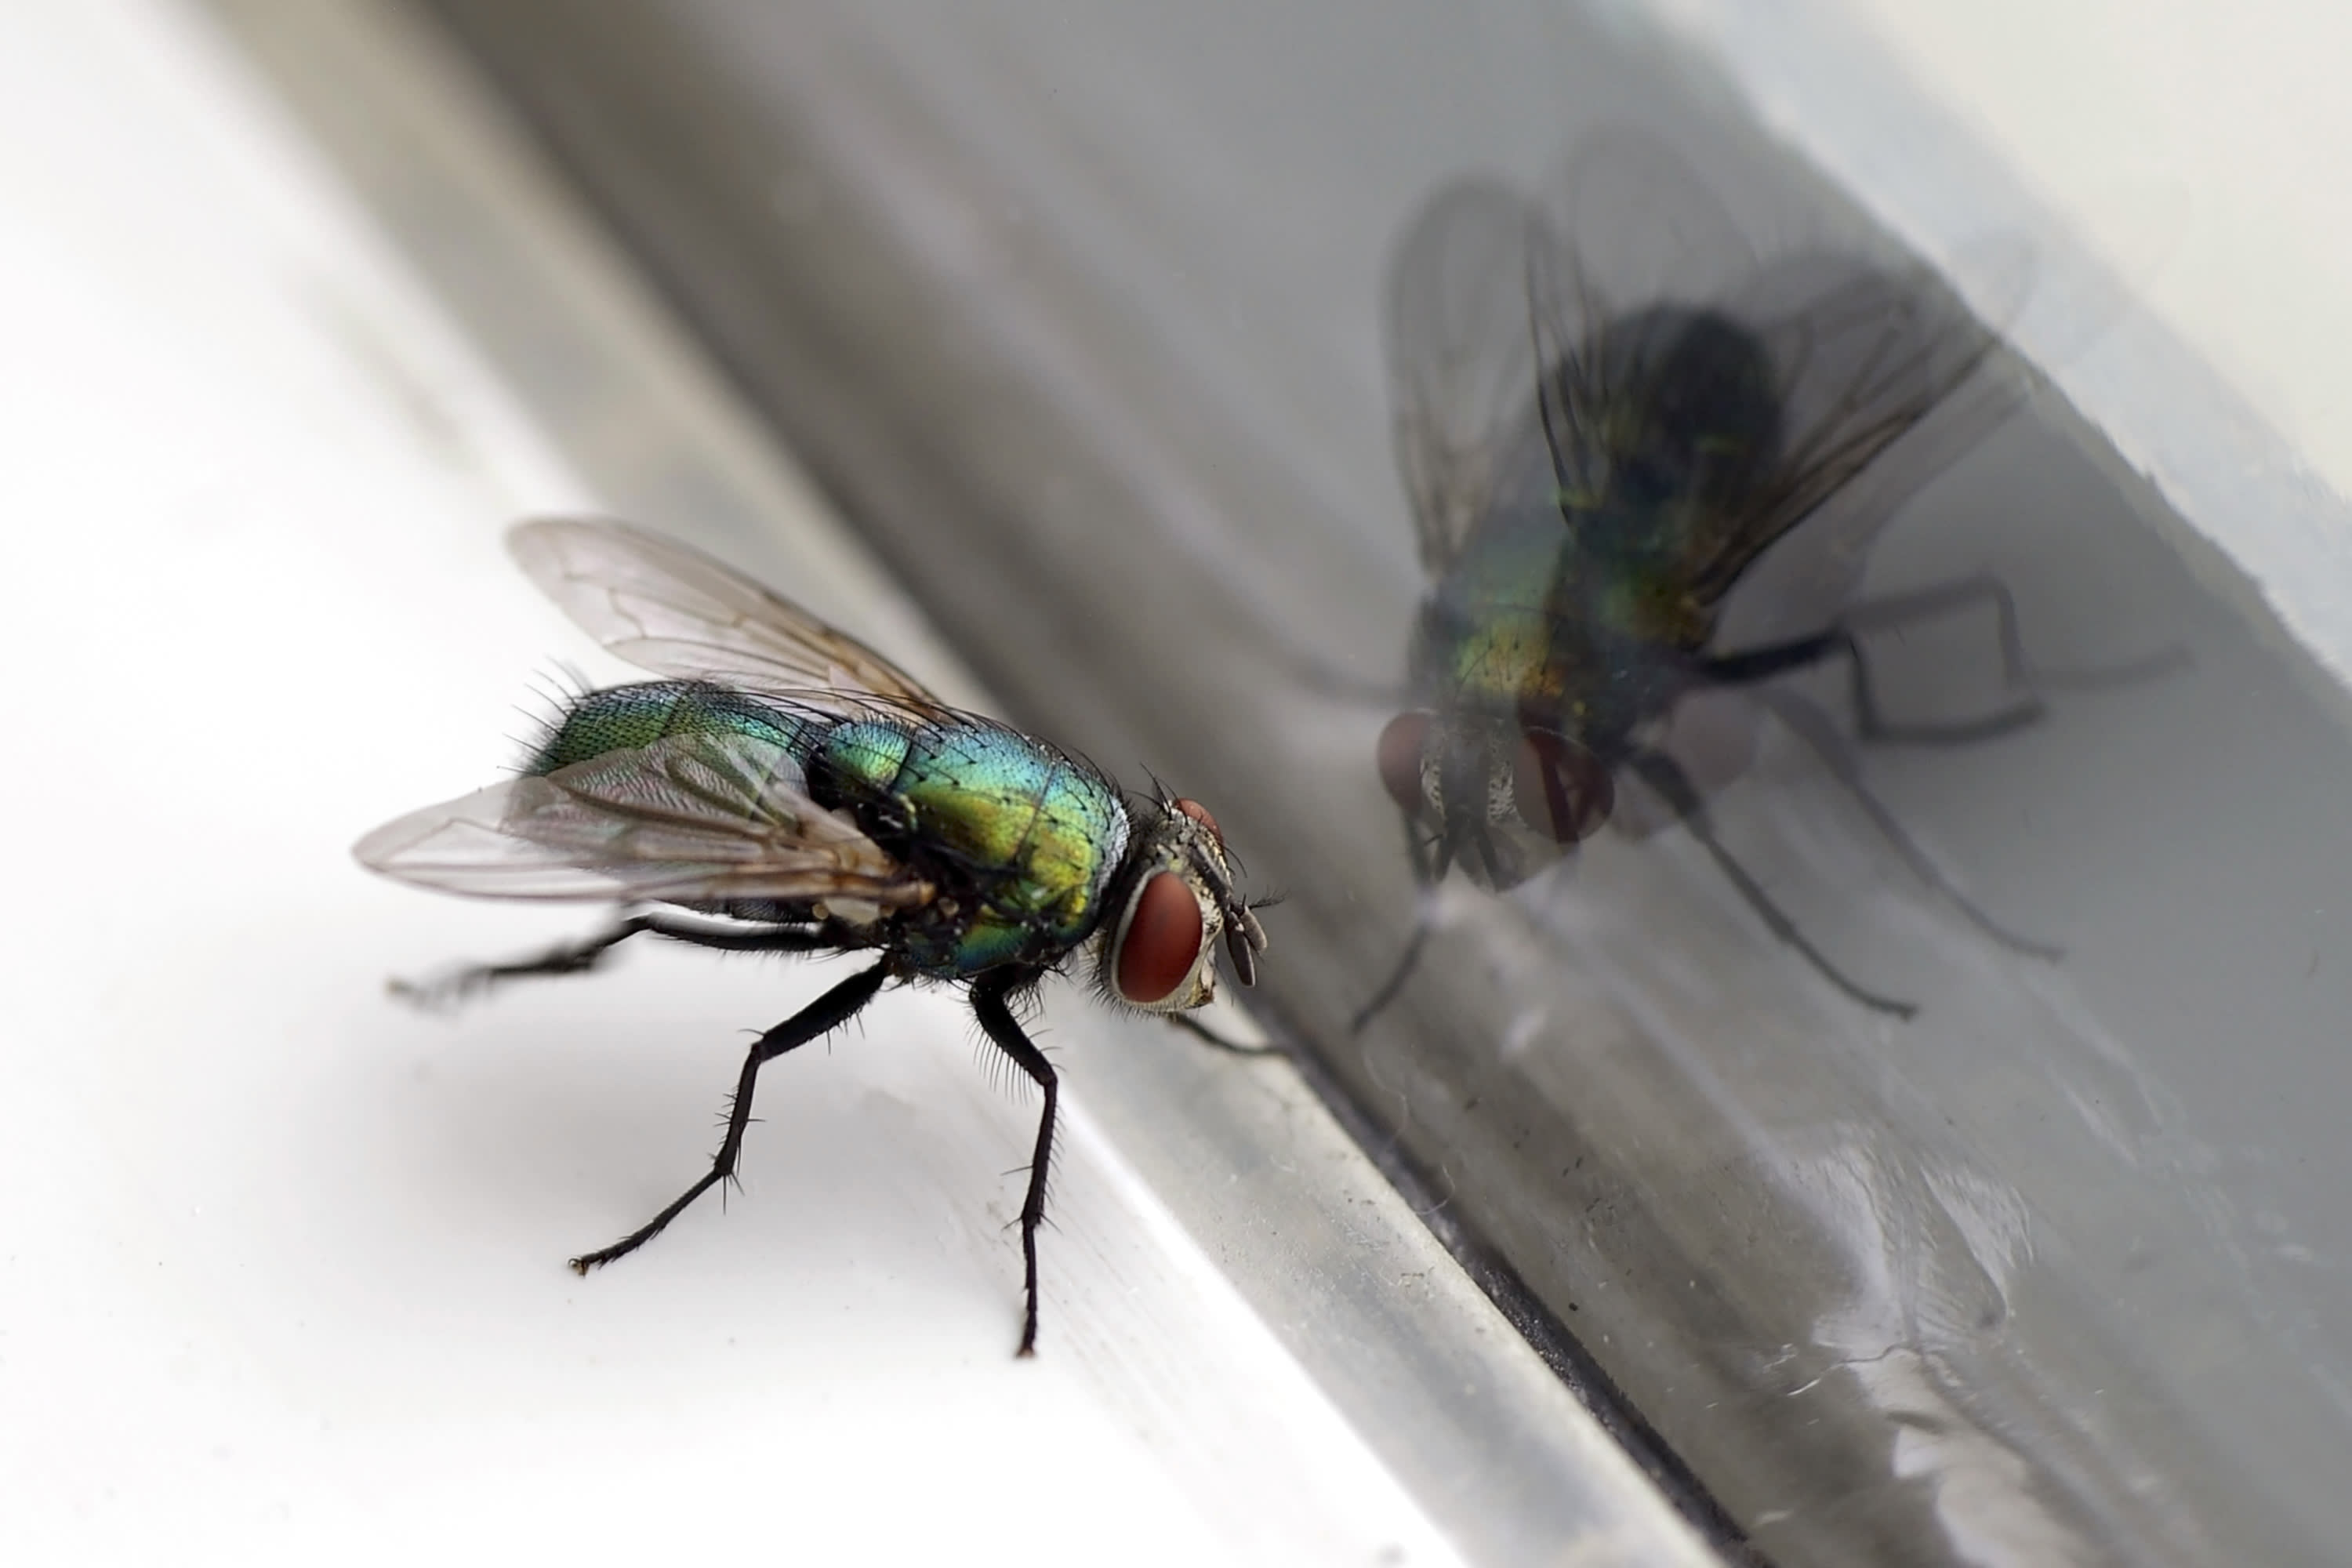 How to Get Rid of House Flies, According to Experts